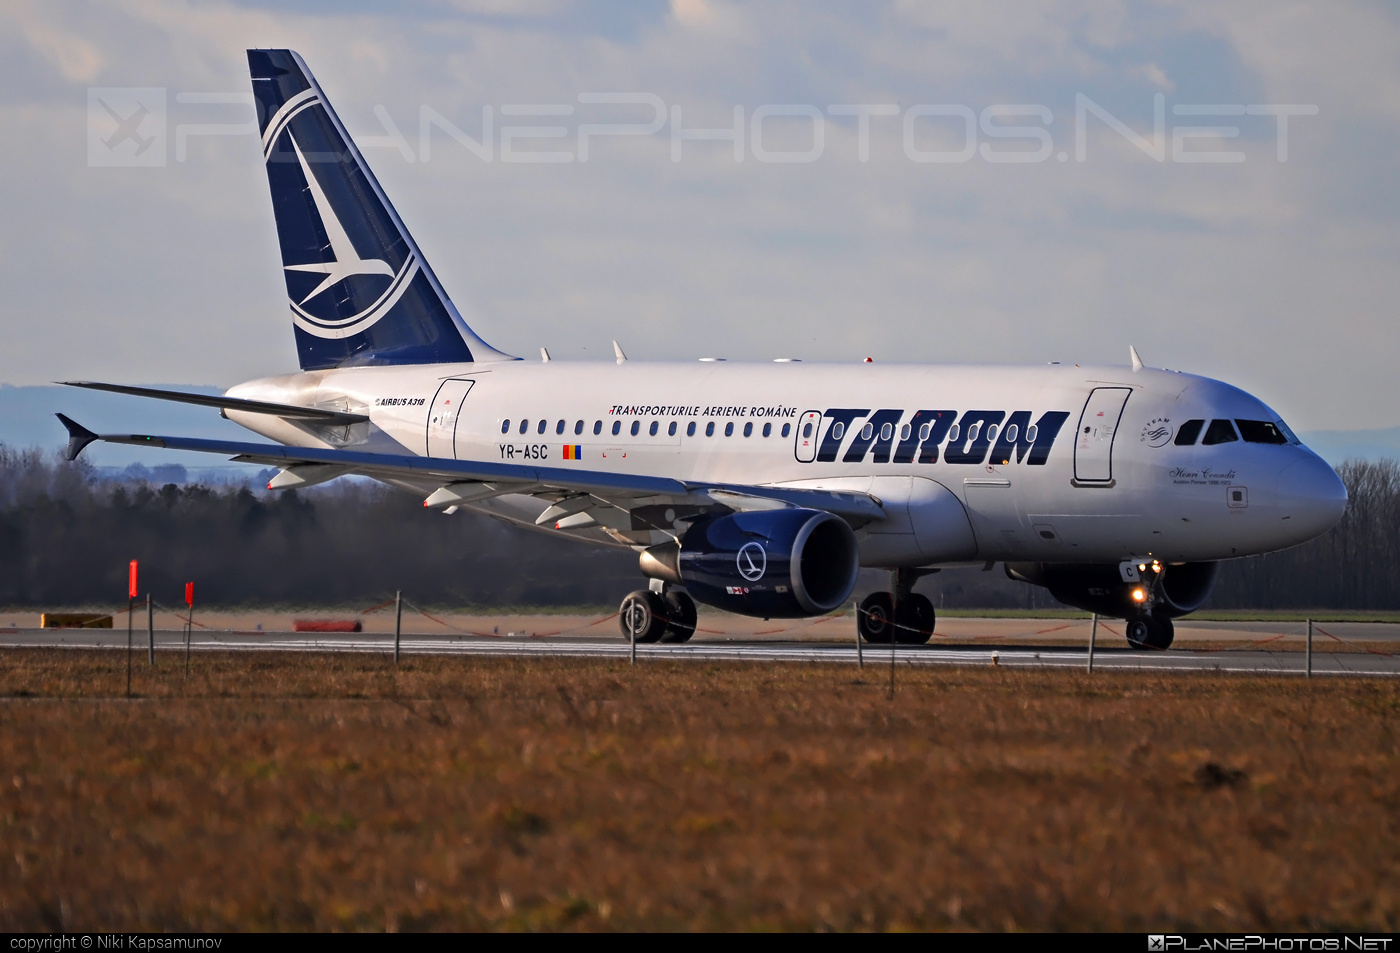 Airbus A318-111 - YR-ASC operated by Tarom #a318 #a320family #airbus #airbus318